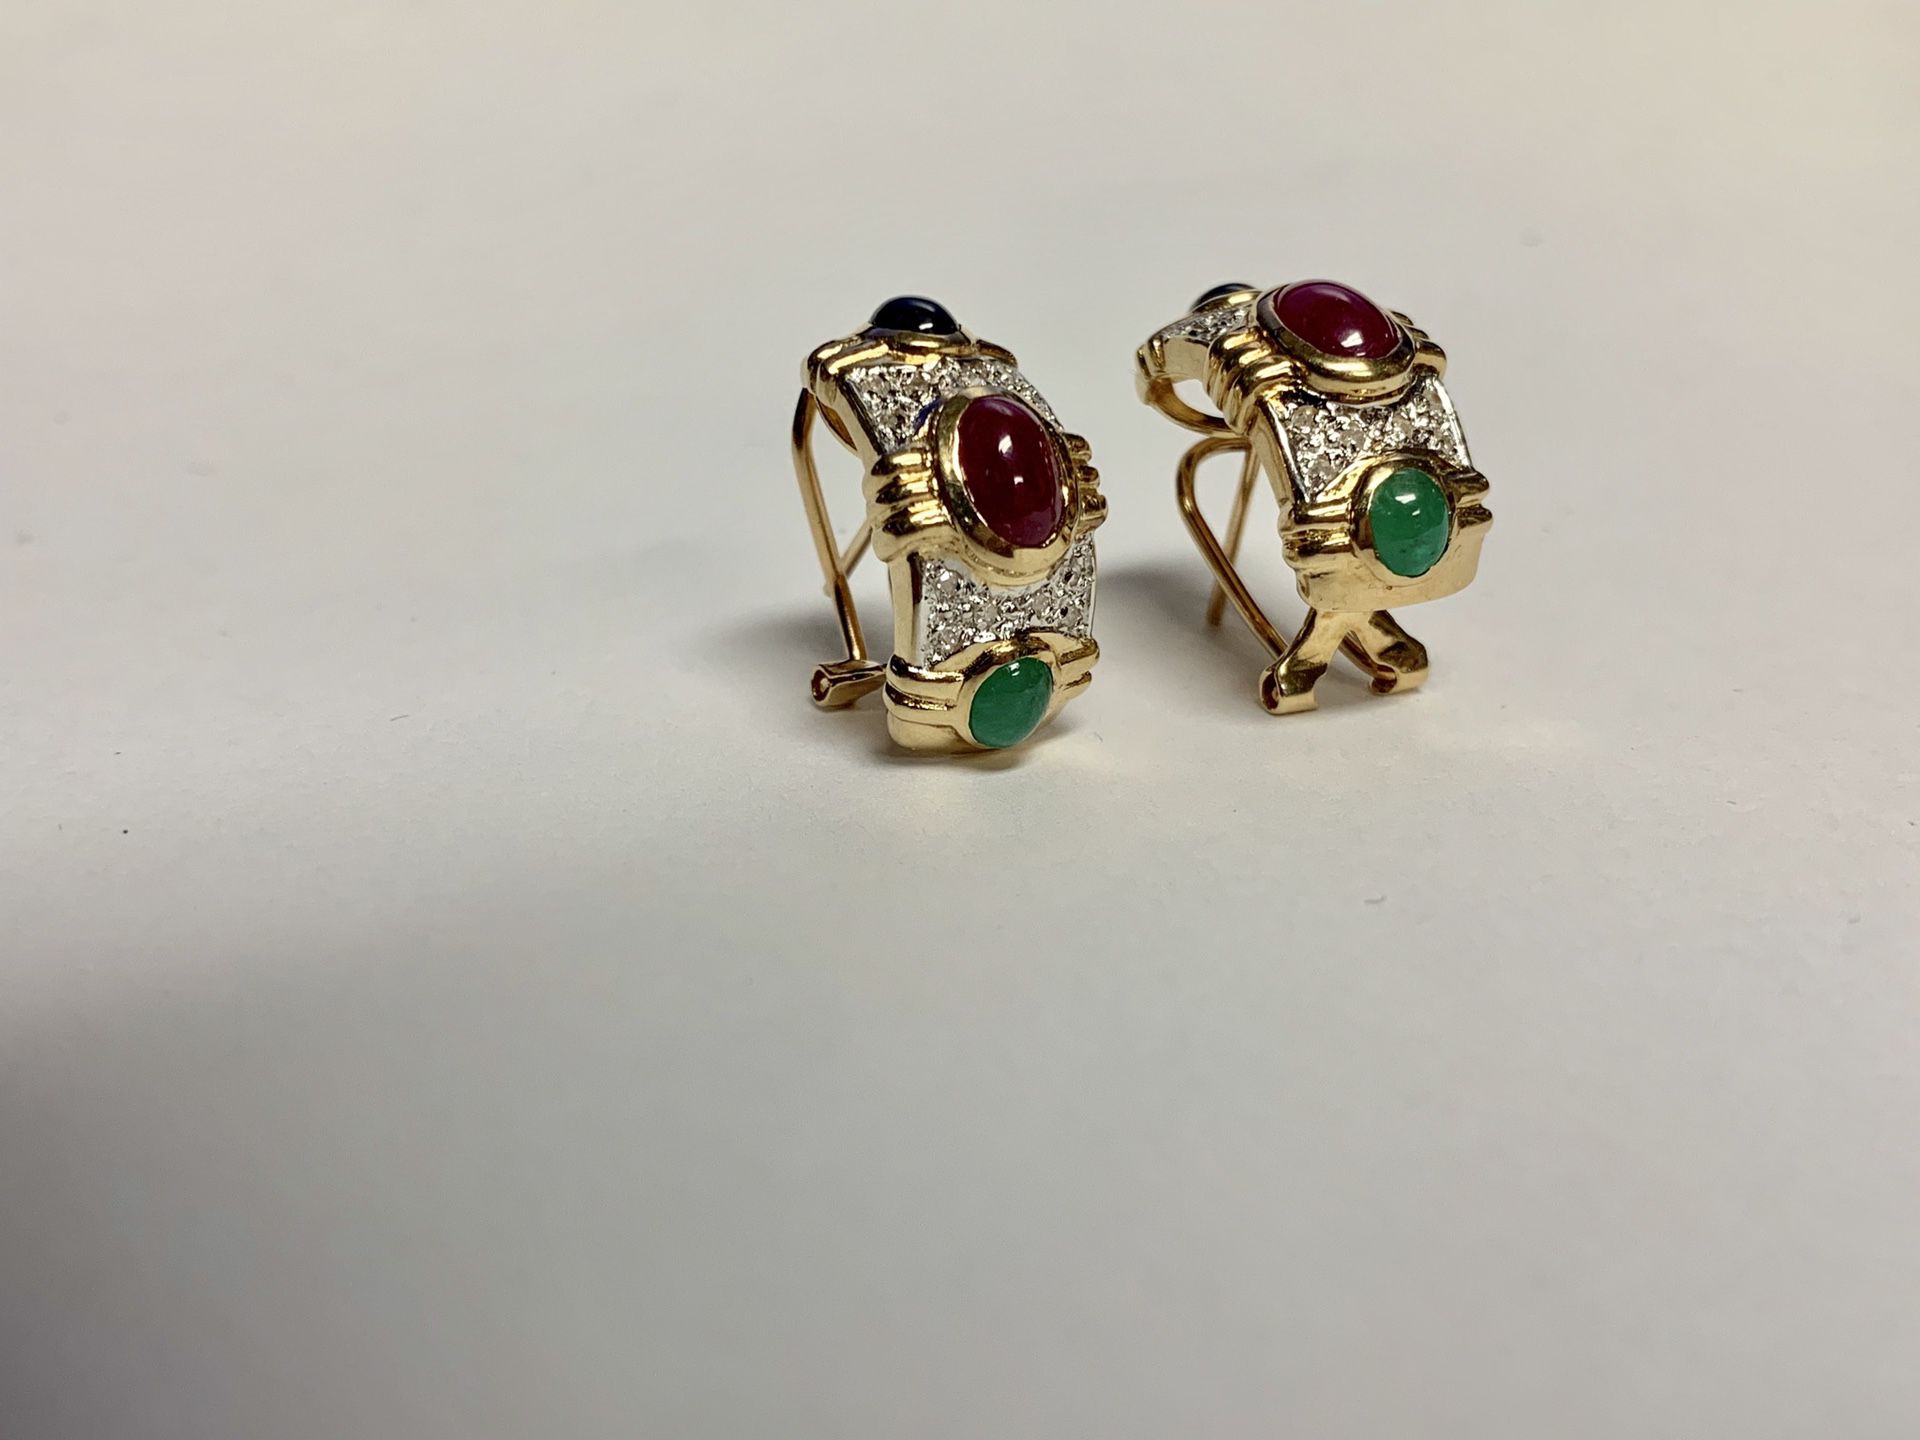 Ladies Cabochon Cut Colored Stone and Diamond Earrings 14k YG